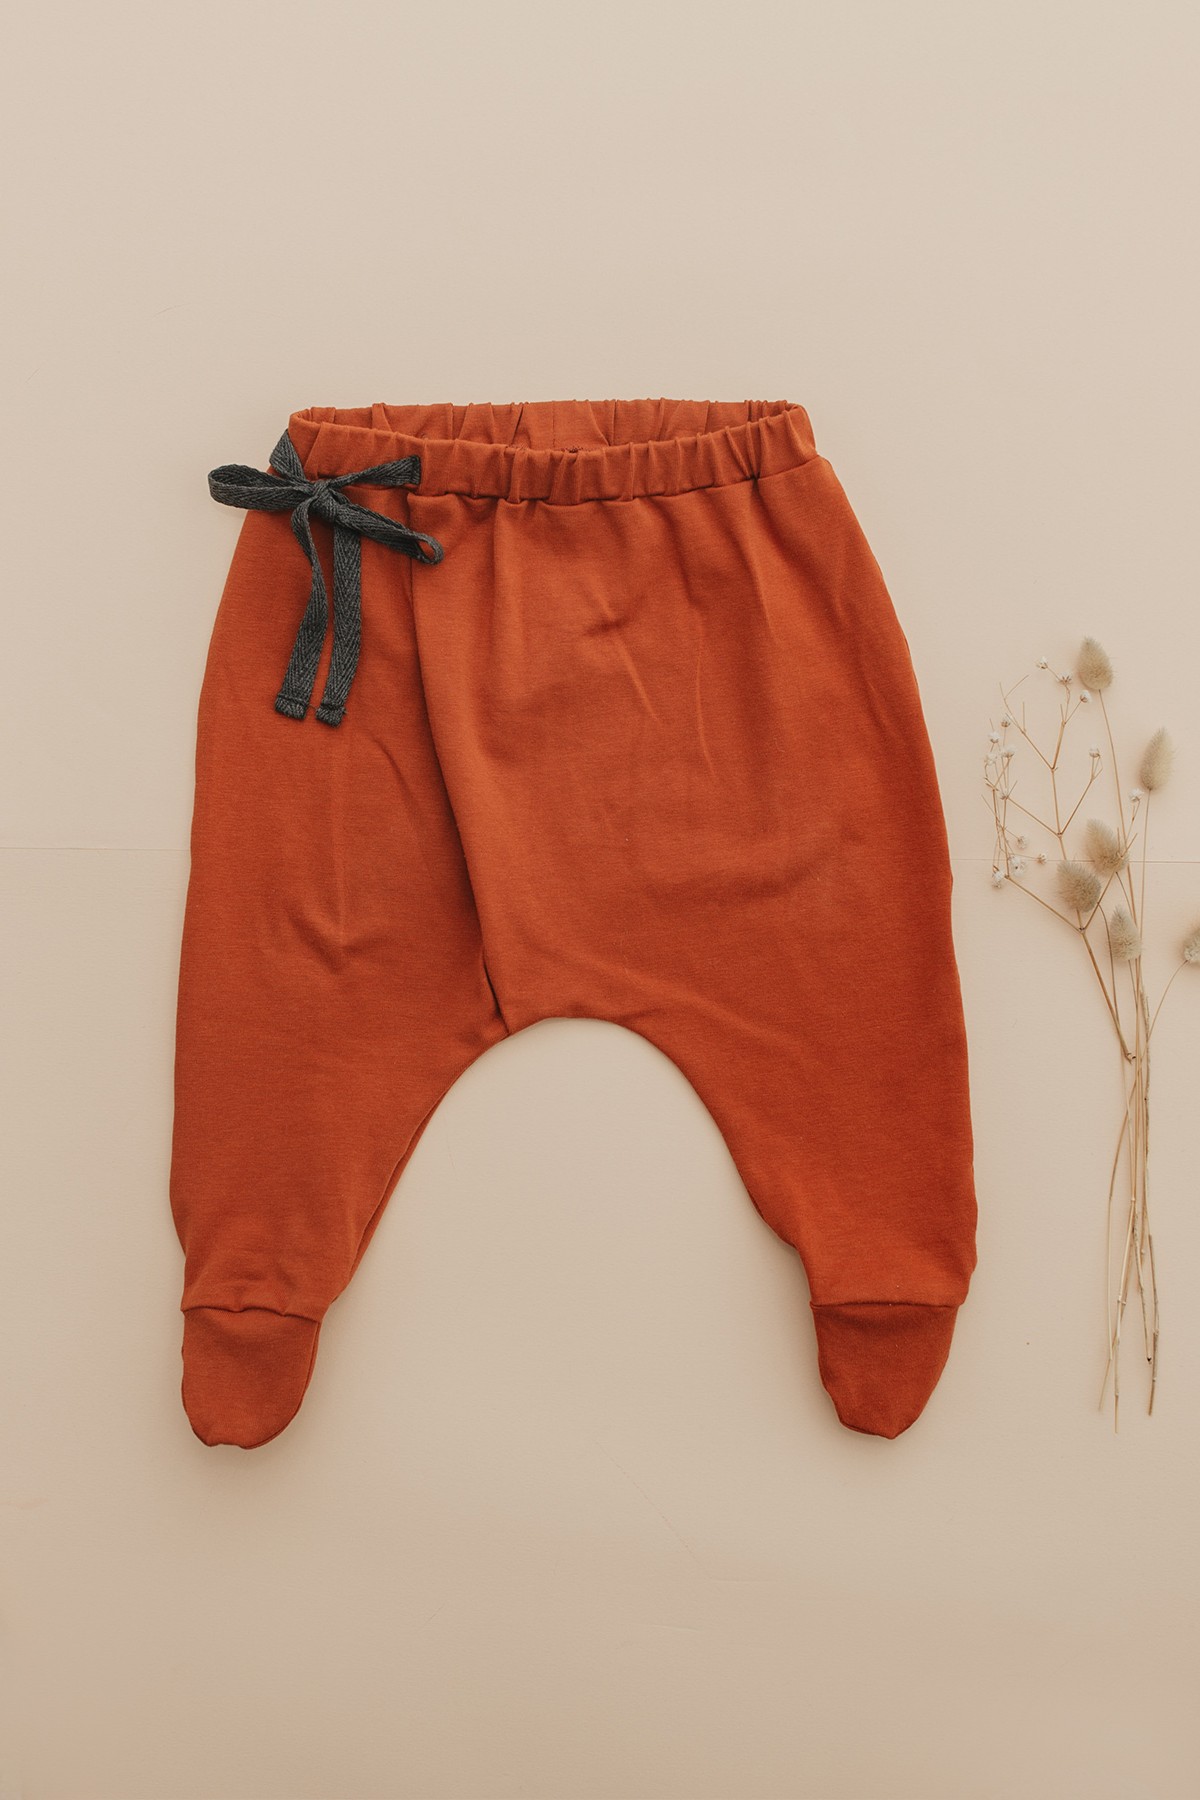 Bow Pants in Cinnamon Color